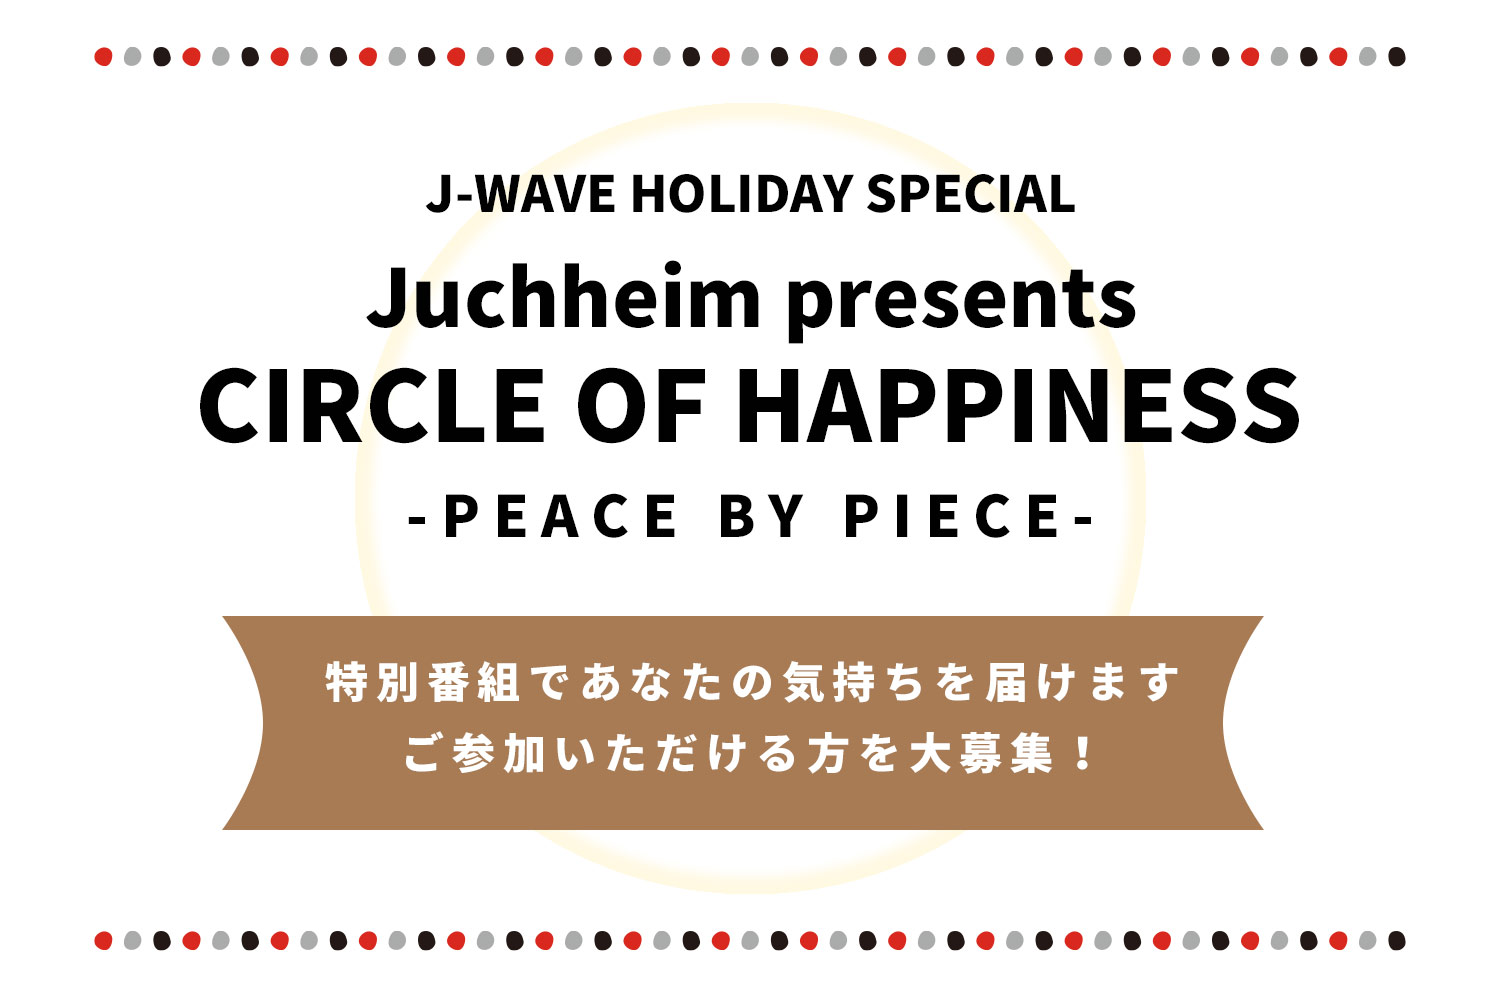 「J-WAVE HOLIDAY SPECIAL Juchheim presents CIRCLE OF HAPPINESS-PEACE BY PIECE」あなたの気持ちを届けます。ご参加いただける方を大募集！